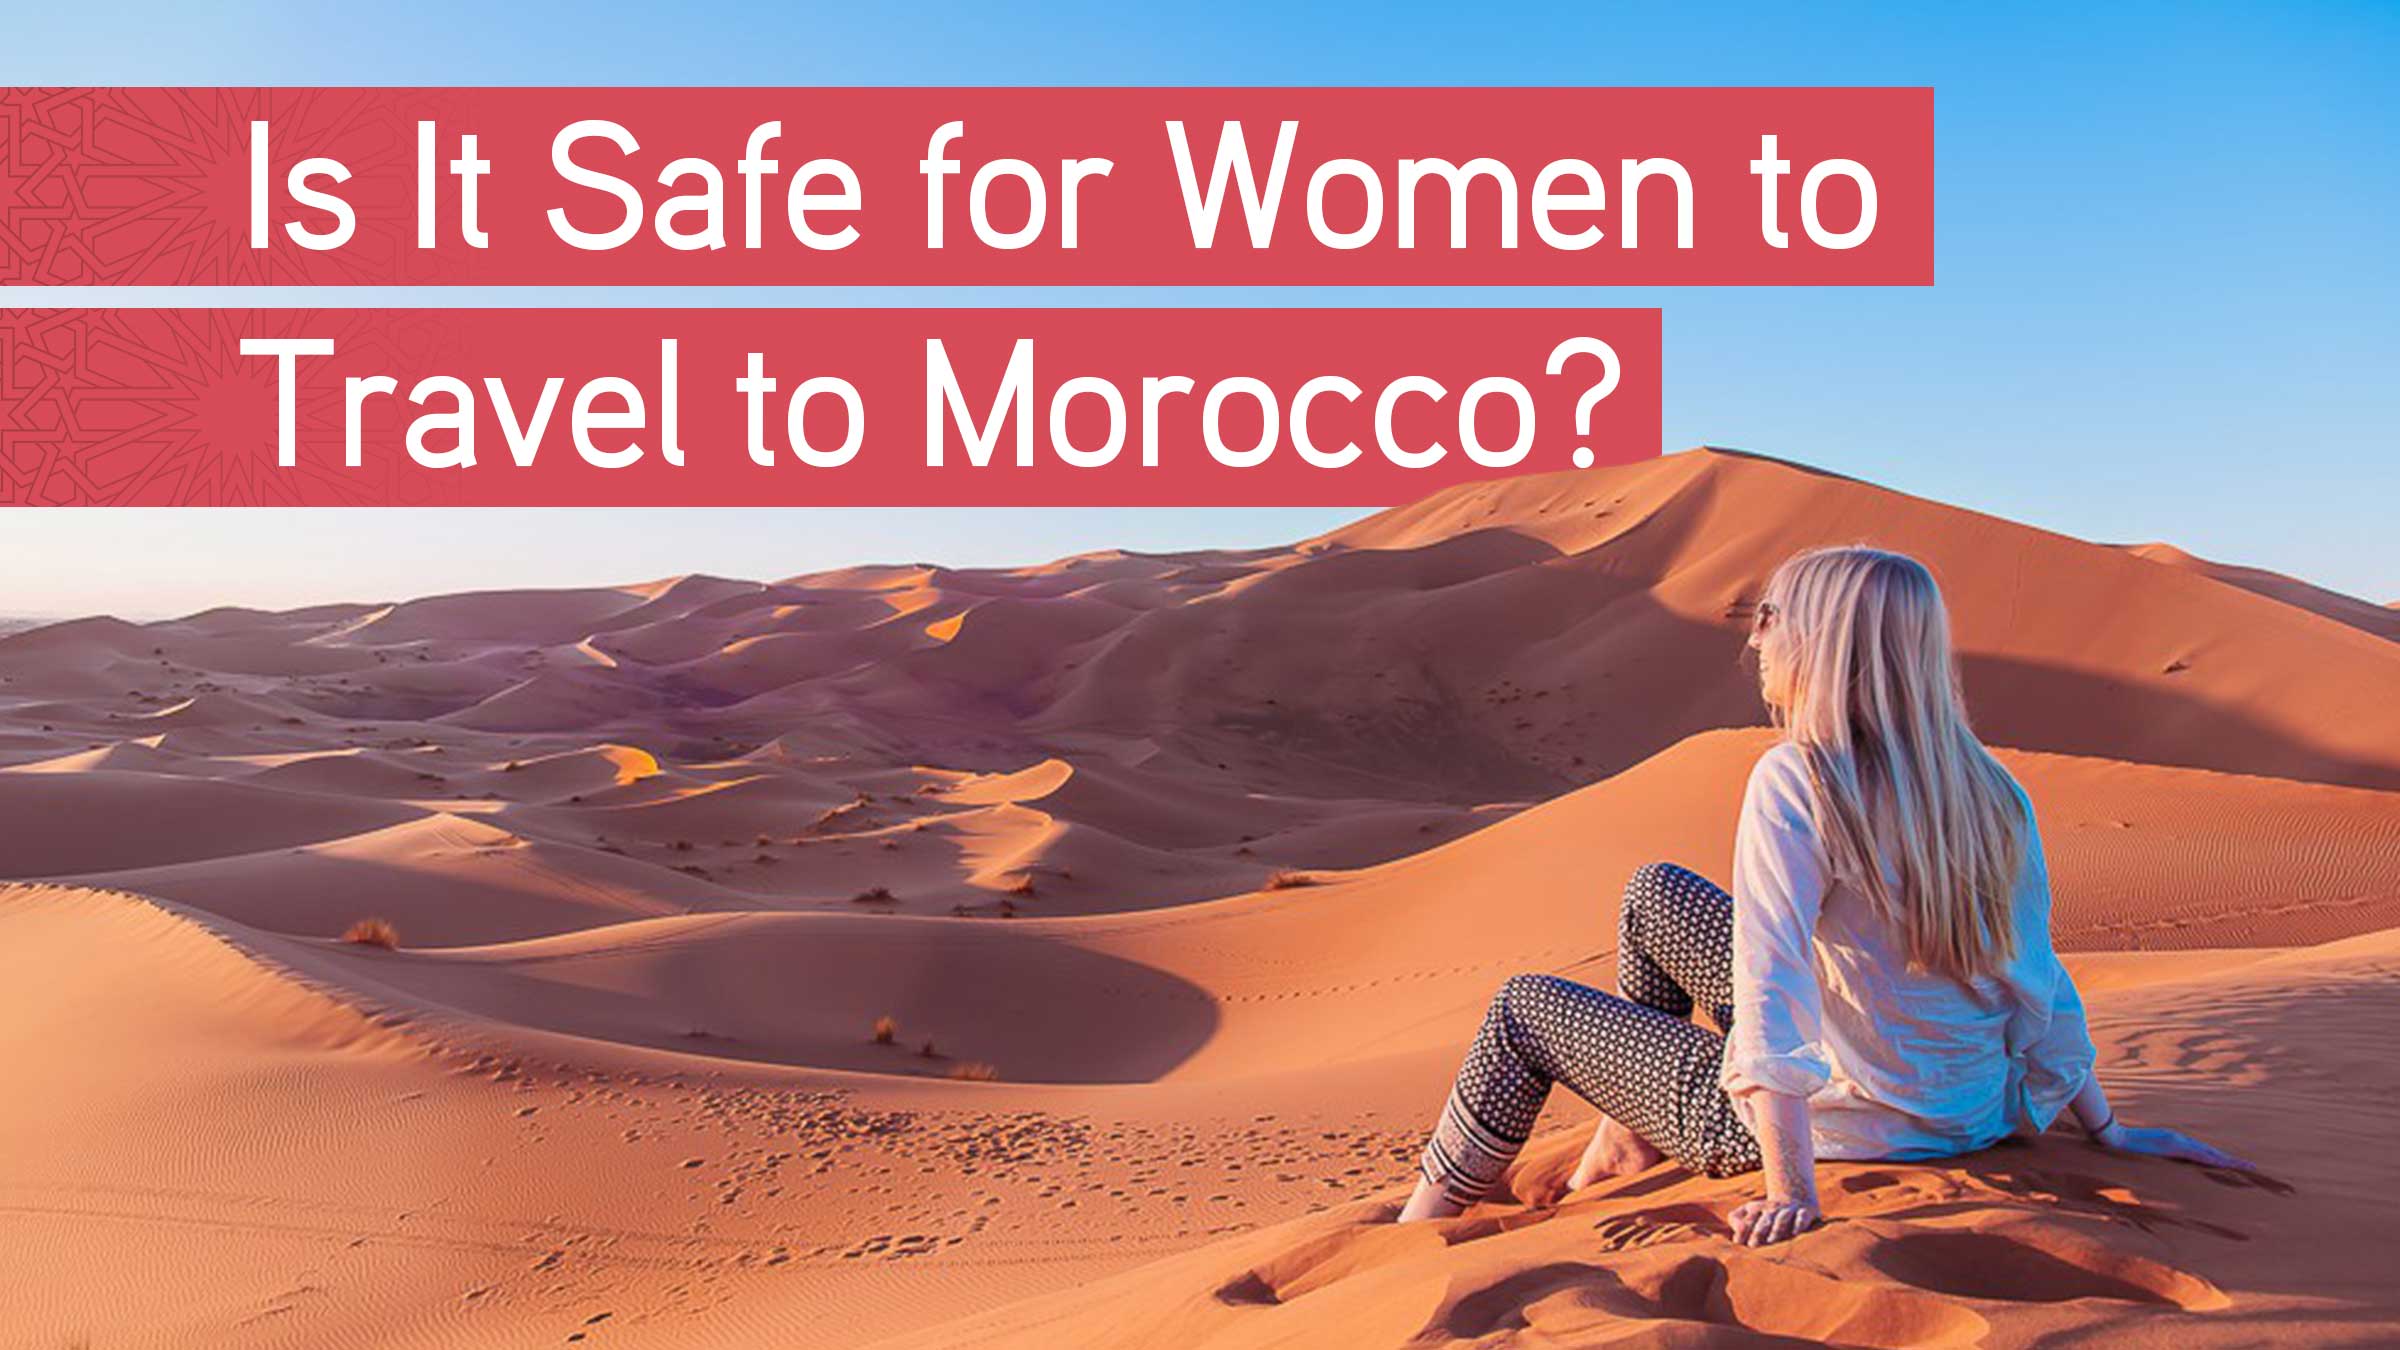 is it safe to travel to morocco as a woman